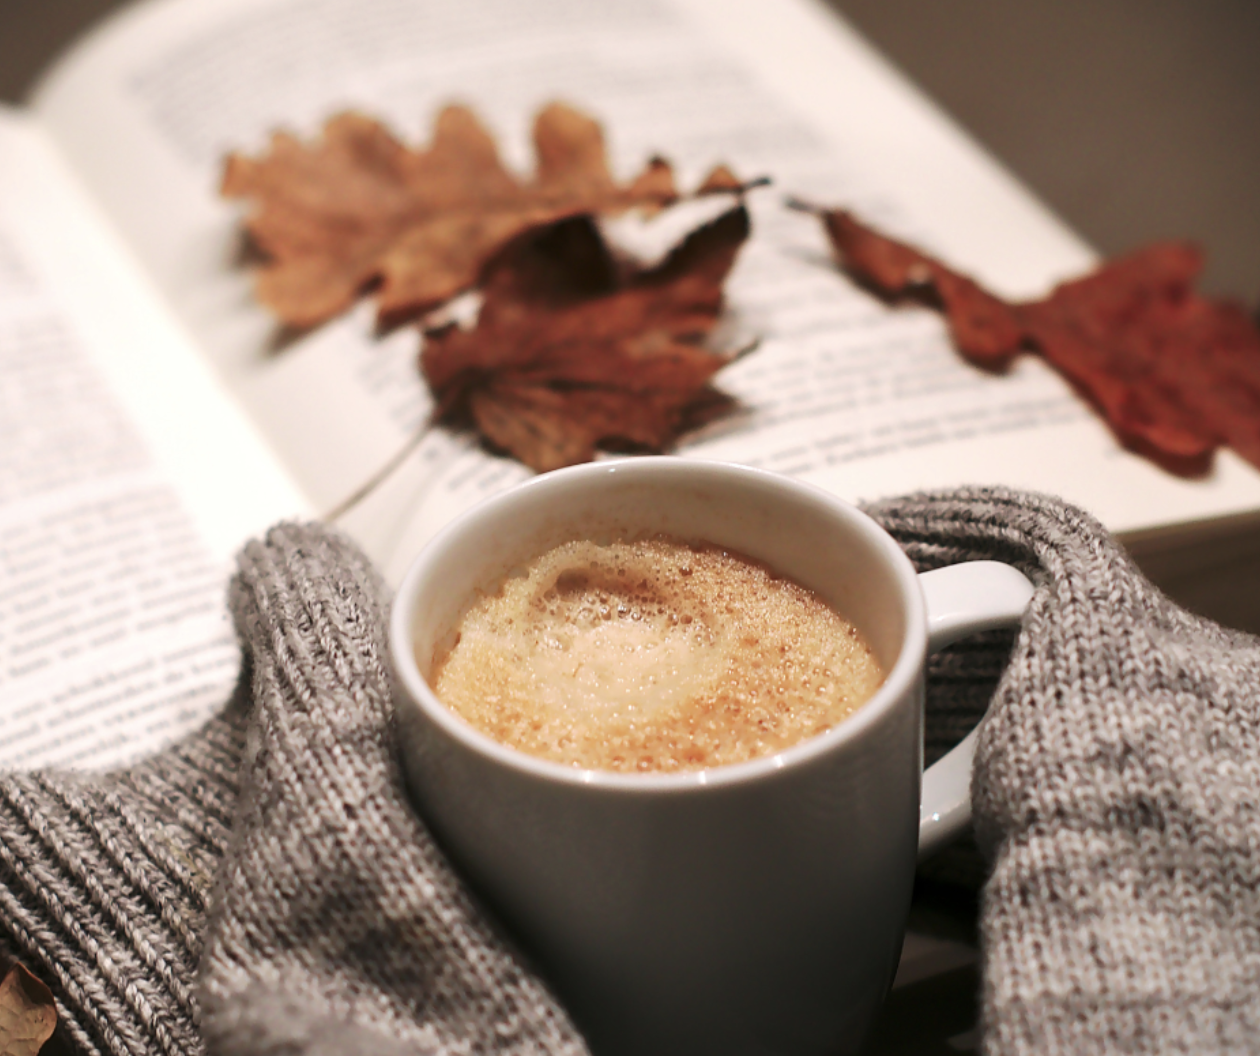 50 Books to Read in the Autumn - Serenity You.png